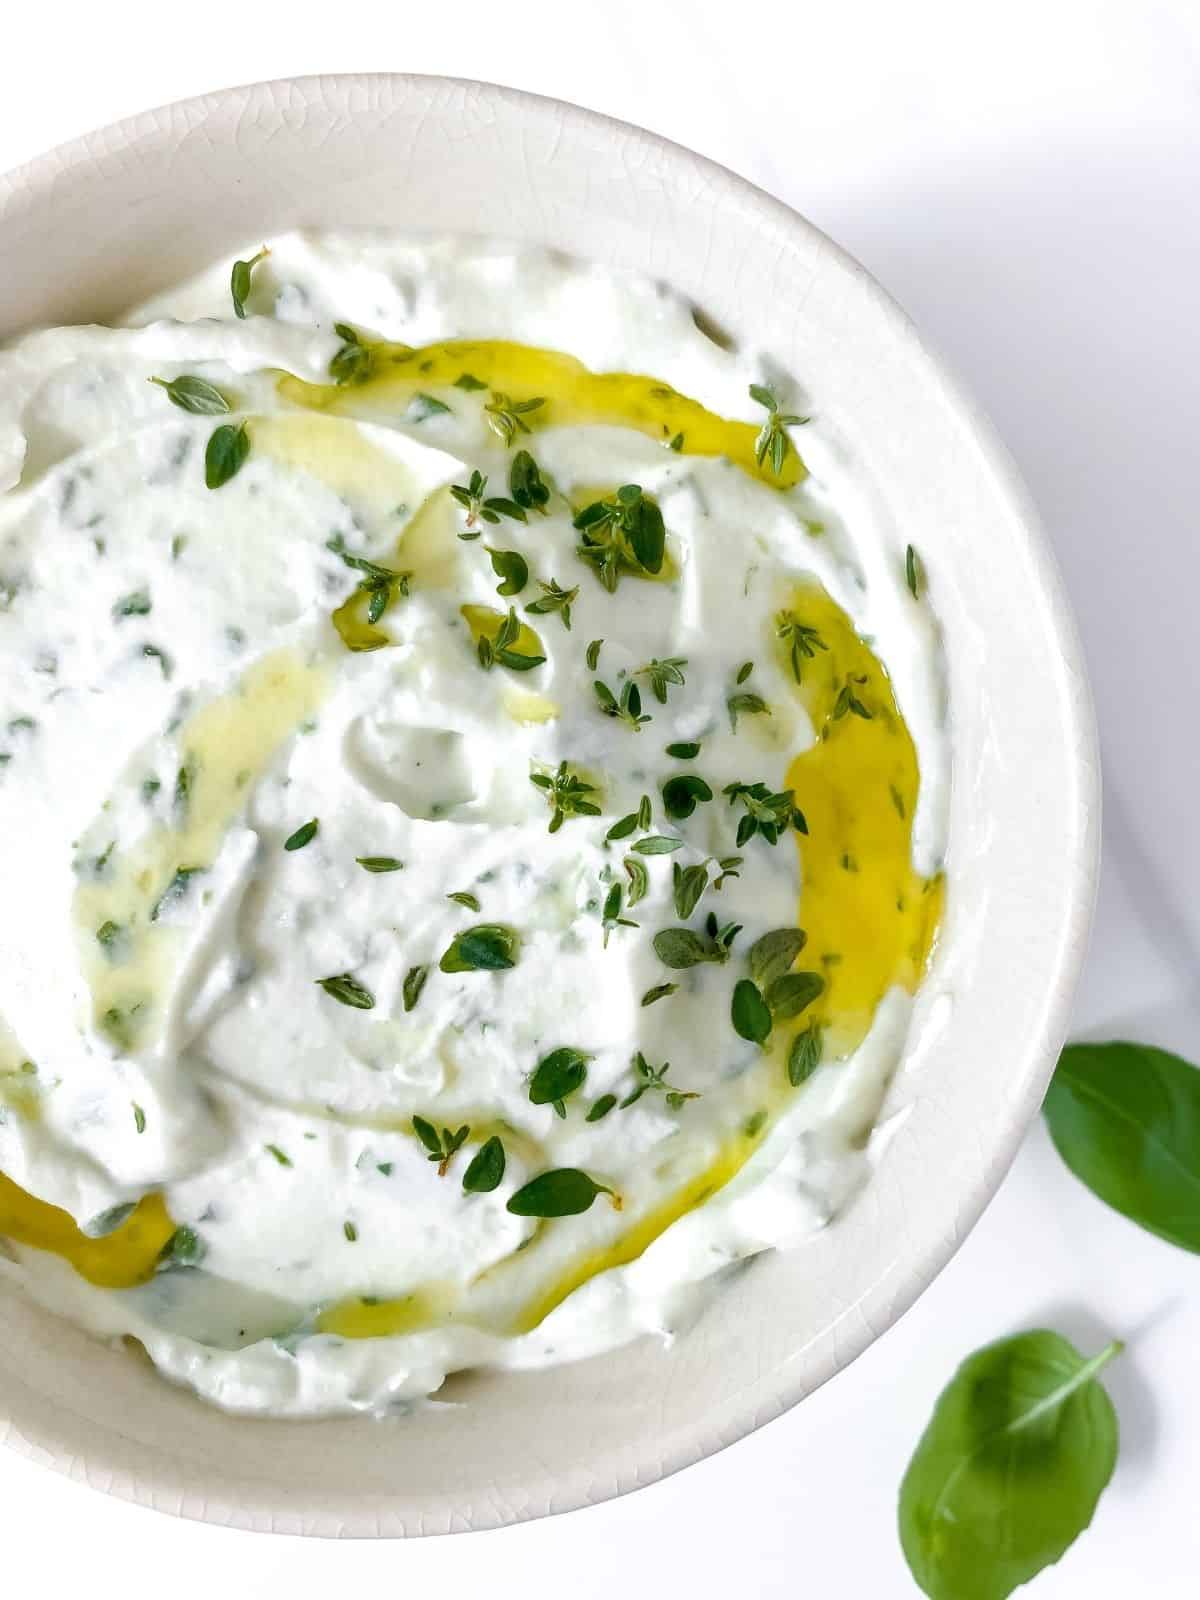 whipped ricotta dip with honey and herbs in a white bowl.